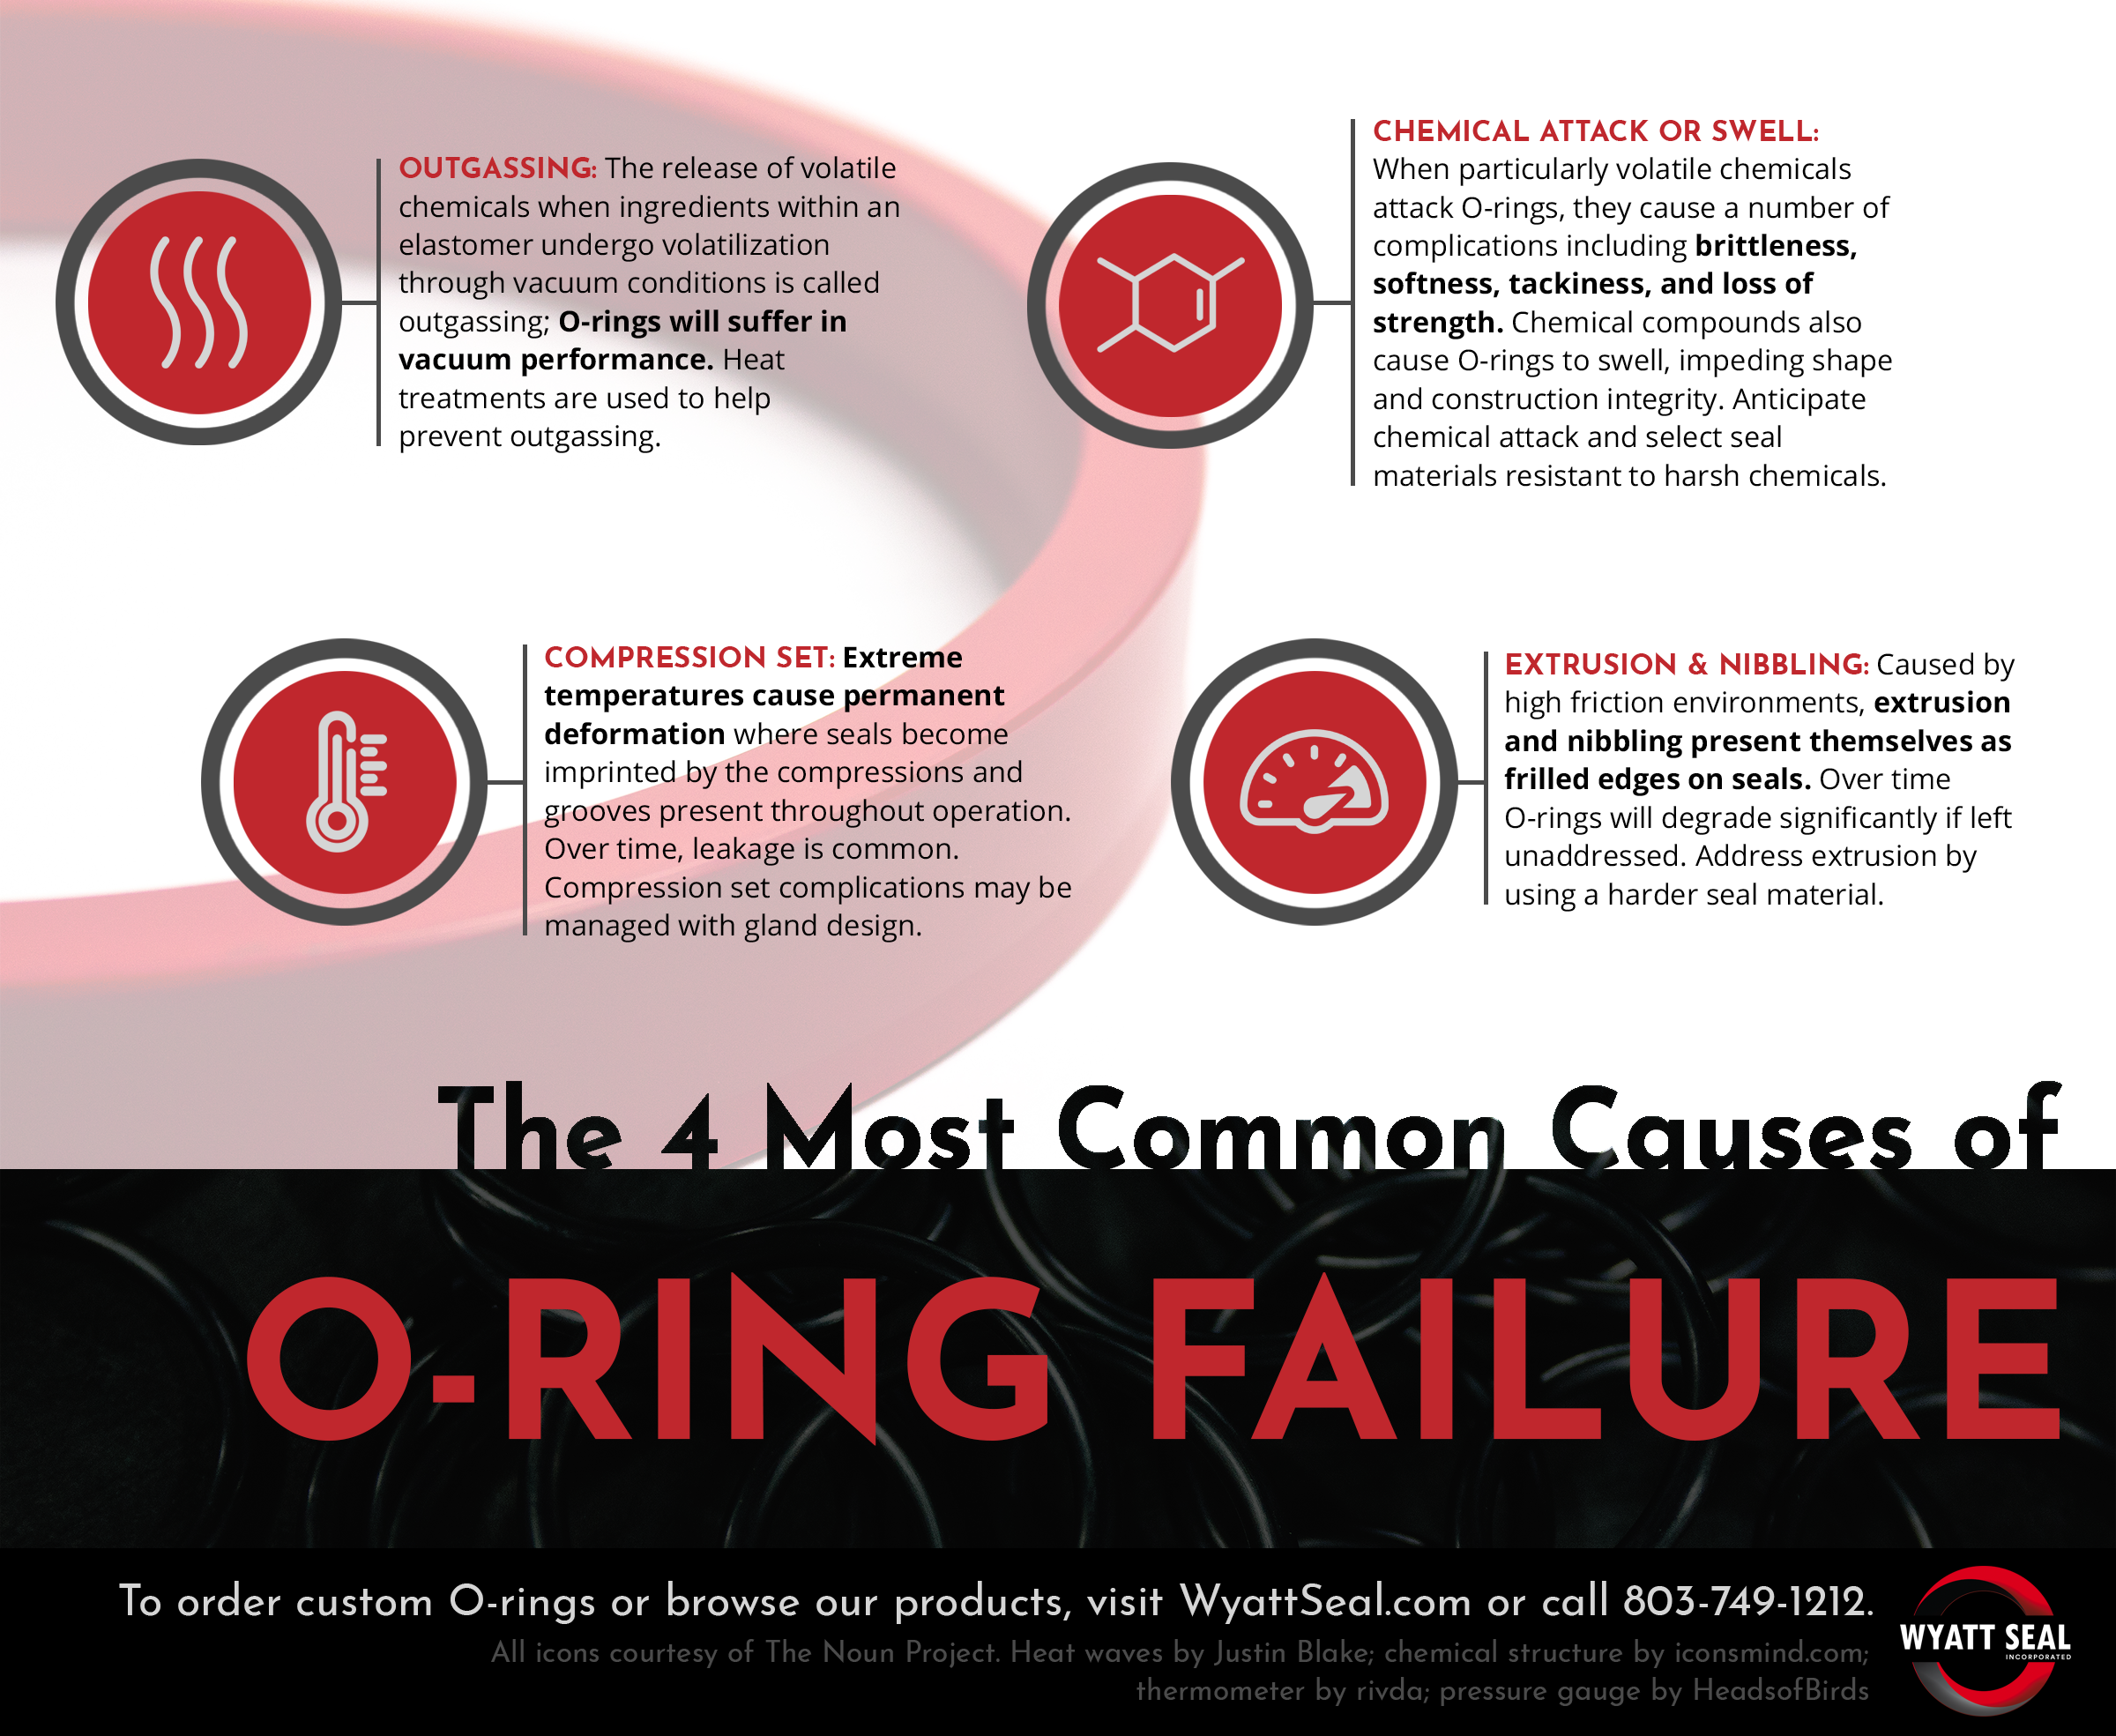 Wyatt_Seal_The_4_Most_Common_Causes_of_O-Ring_Failure